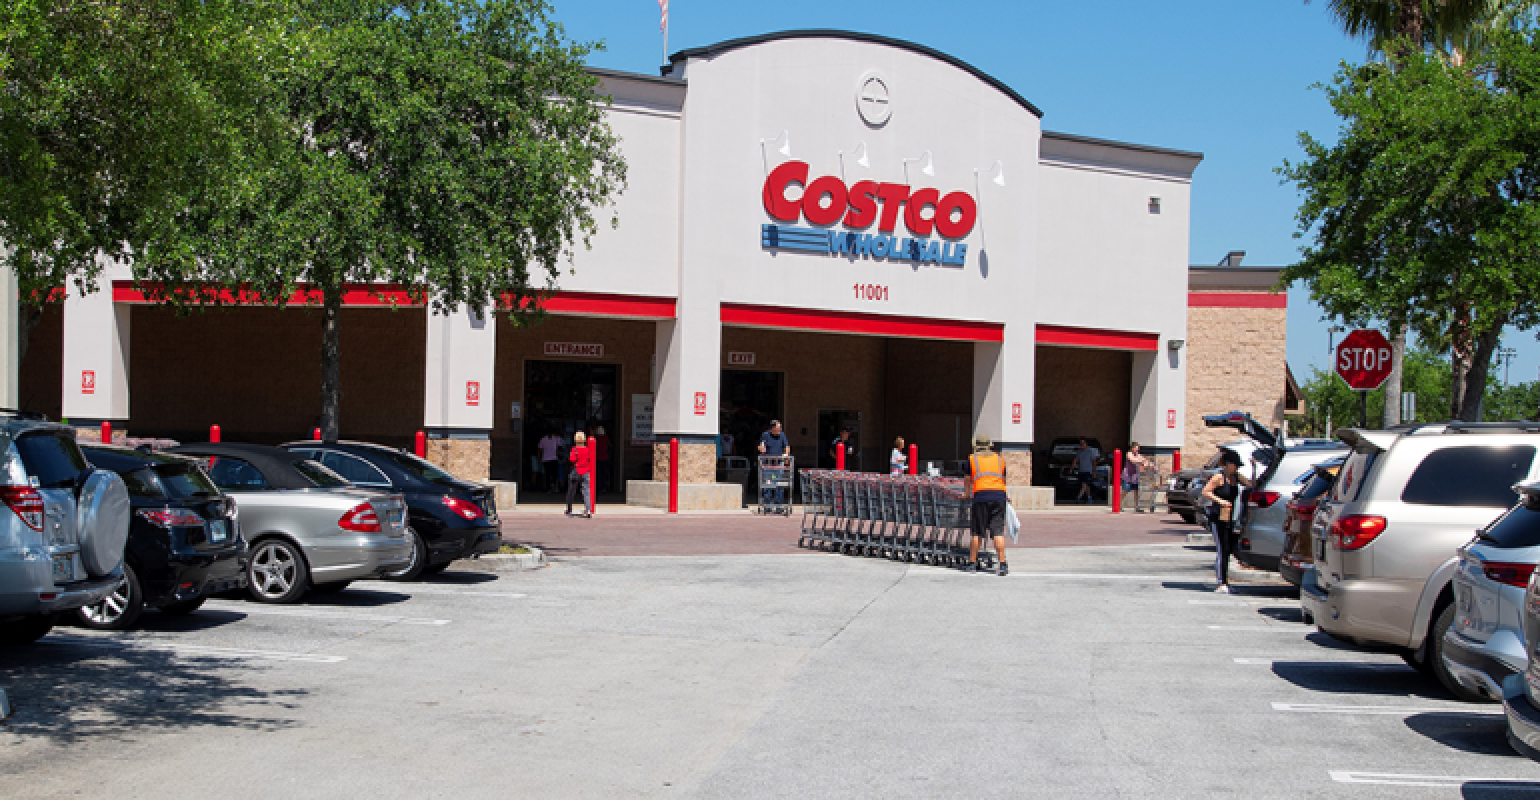 Costco Wholesale turns in first-quarter gains